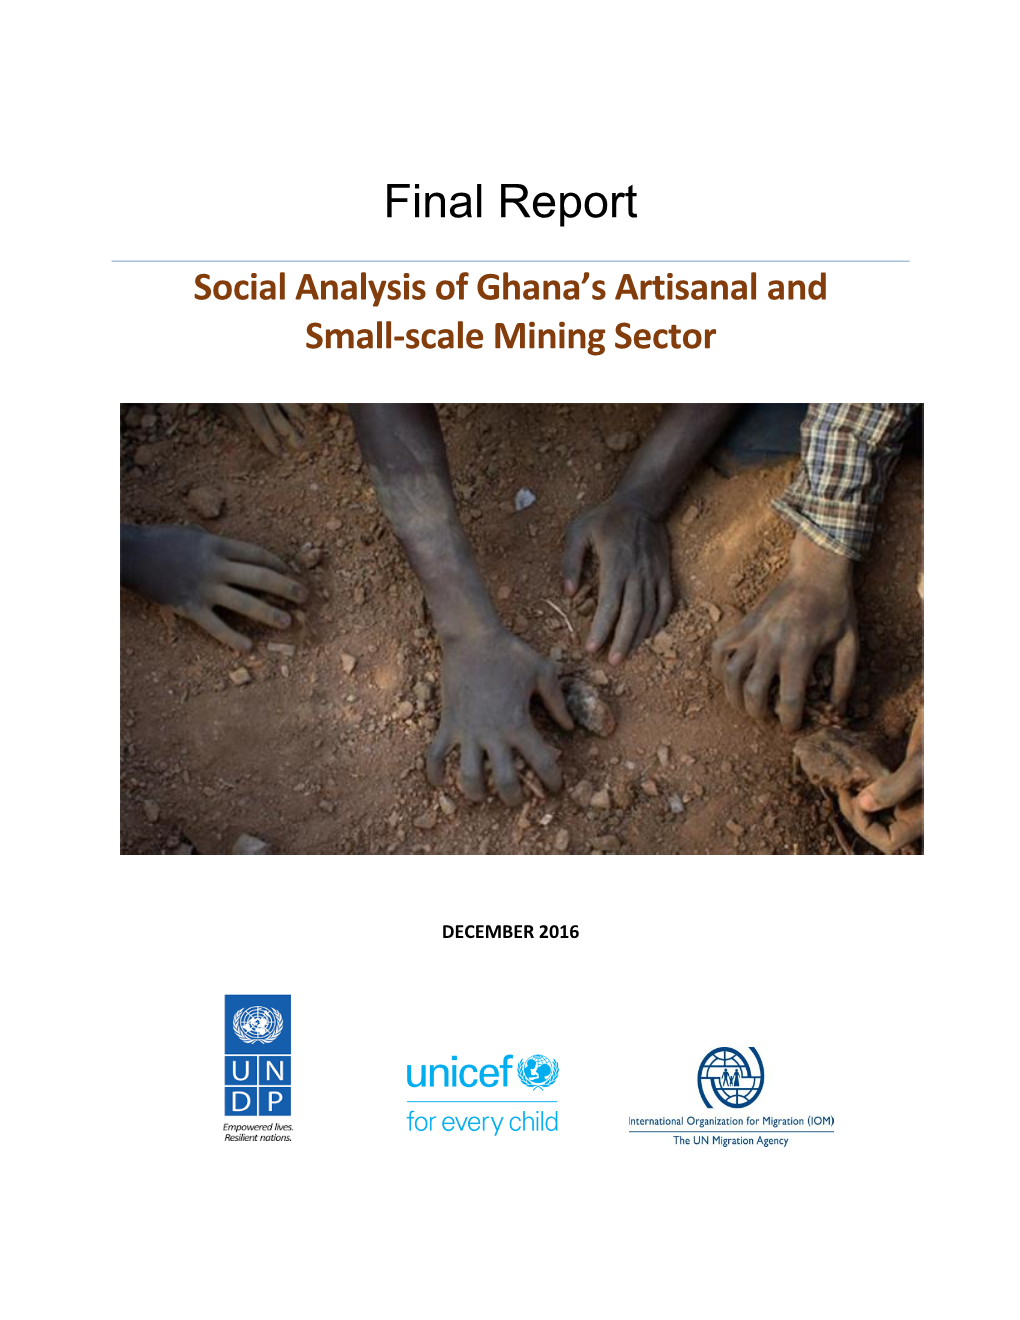 Social Analysis of Ghana's Artisanal and Small-Scale Mining Sector